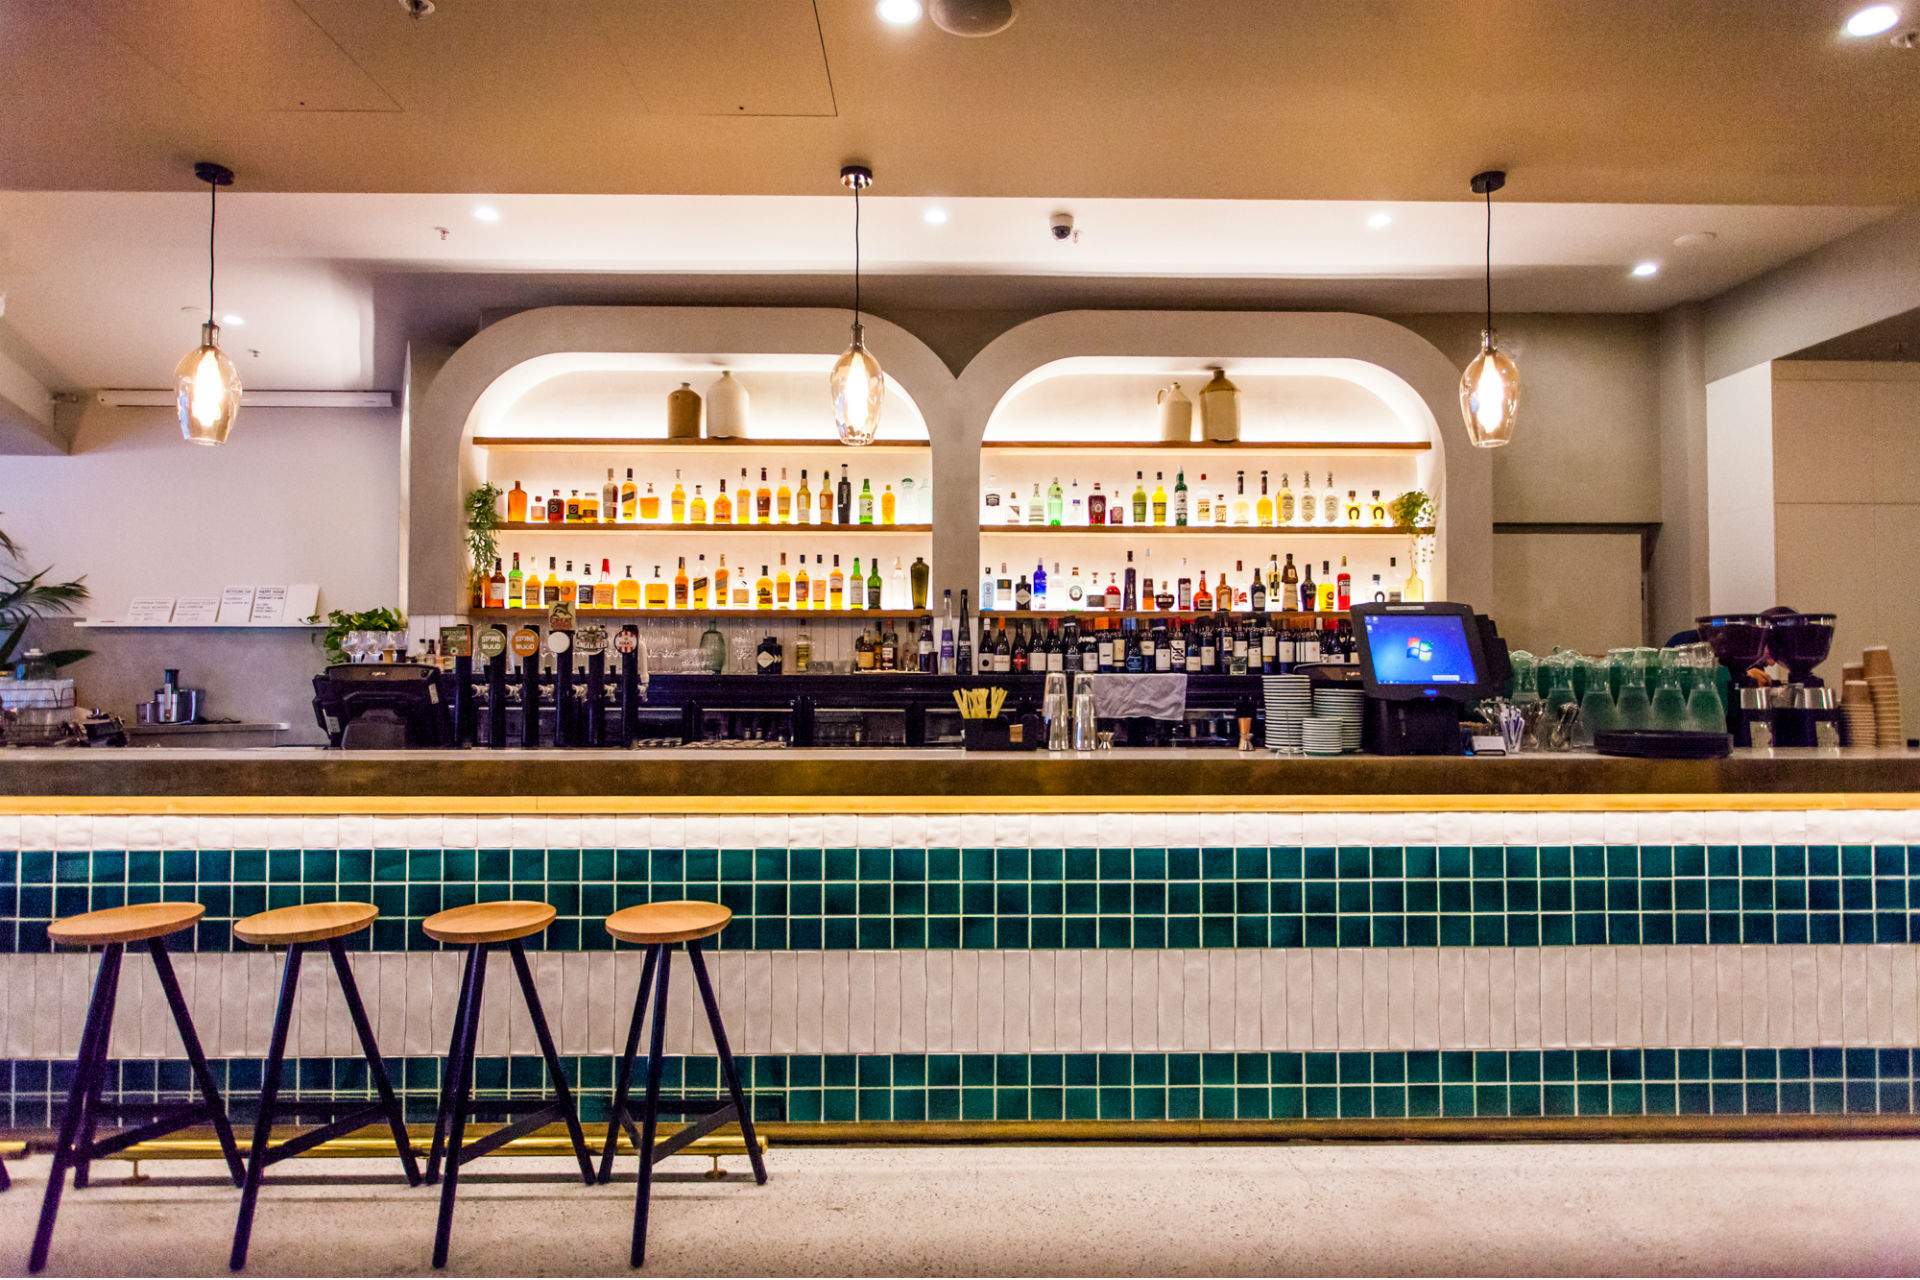 Meet Isles Lane, Brisbane's New Parkside Pub Right in the Middle of the City